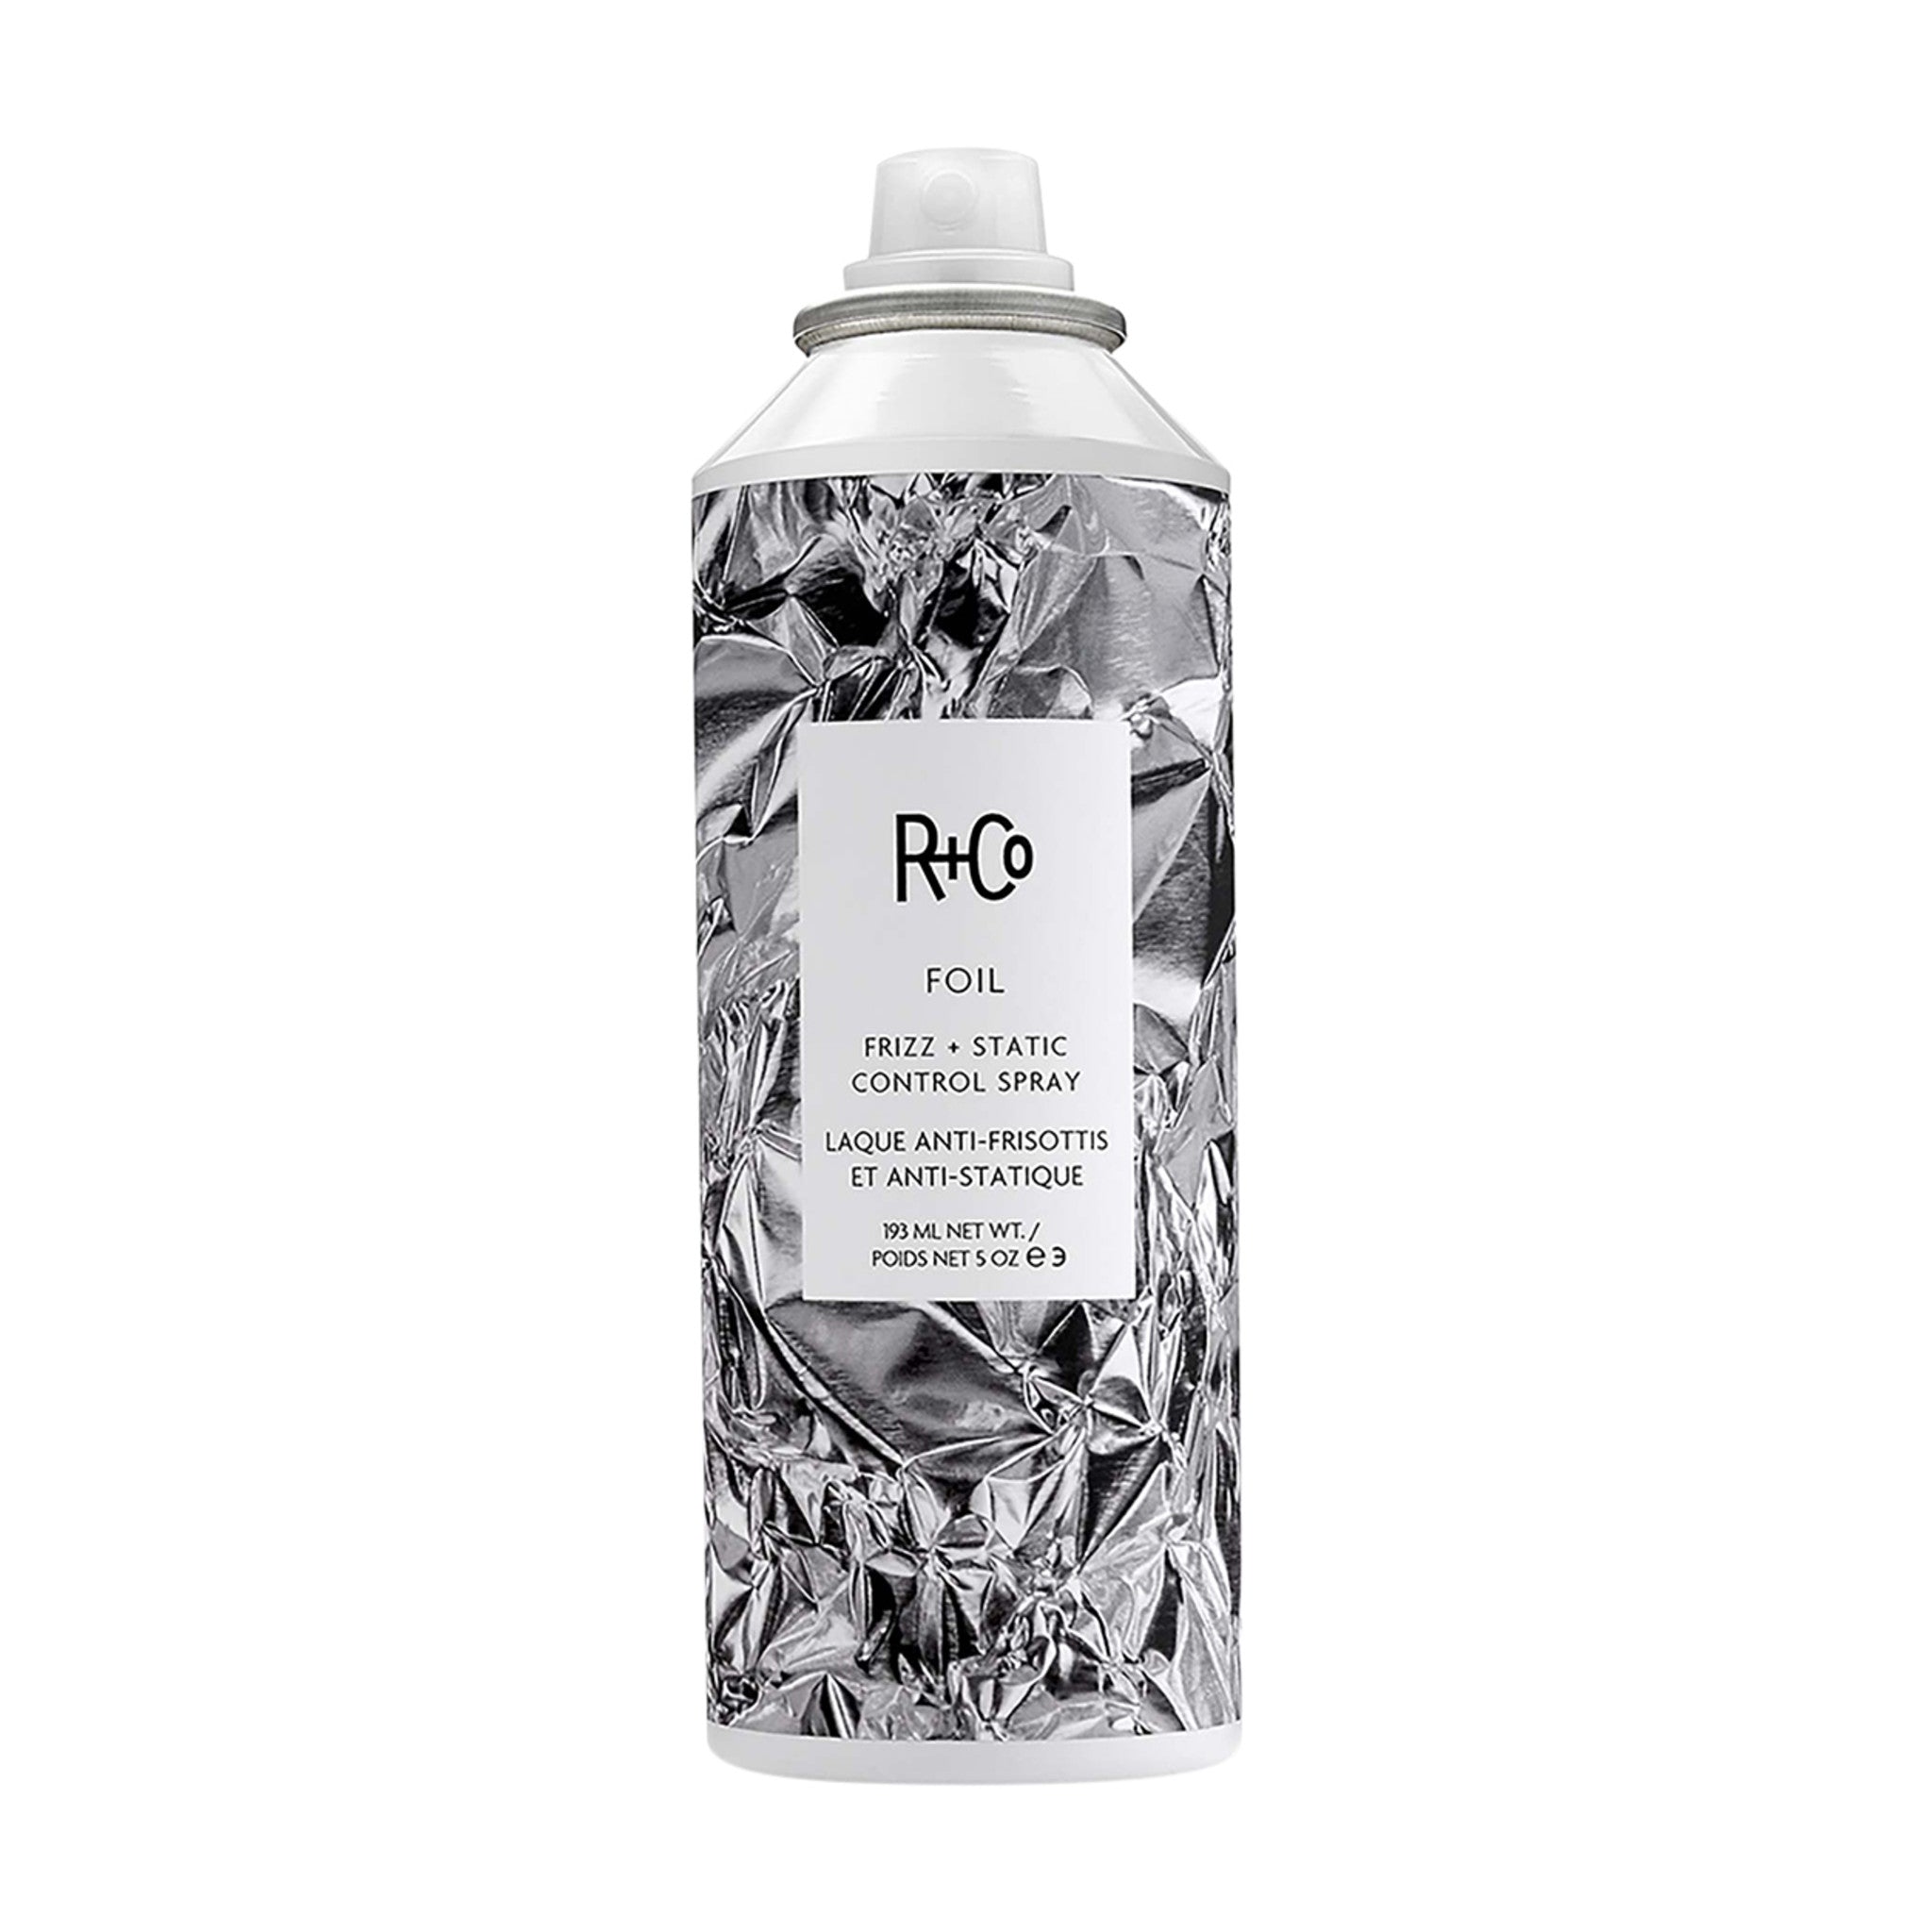 R+Co Foil Frizz and Static Control Spray main image.